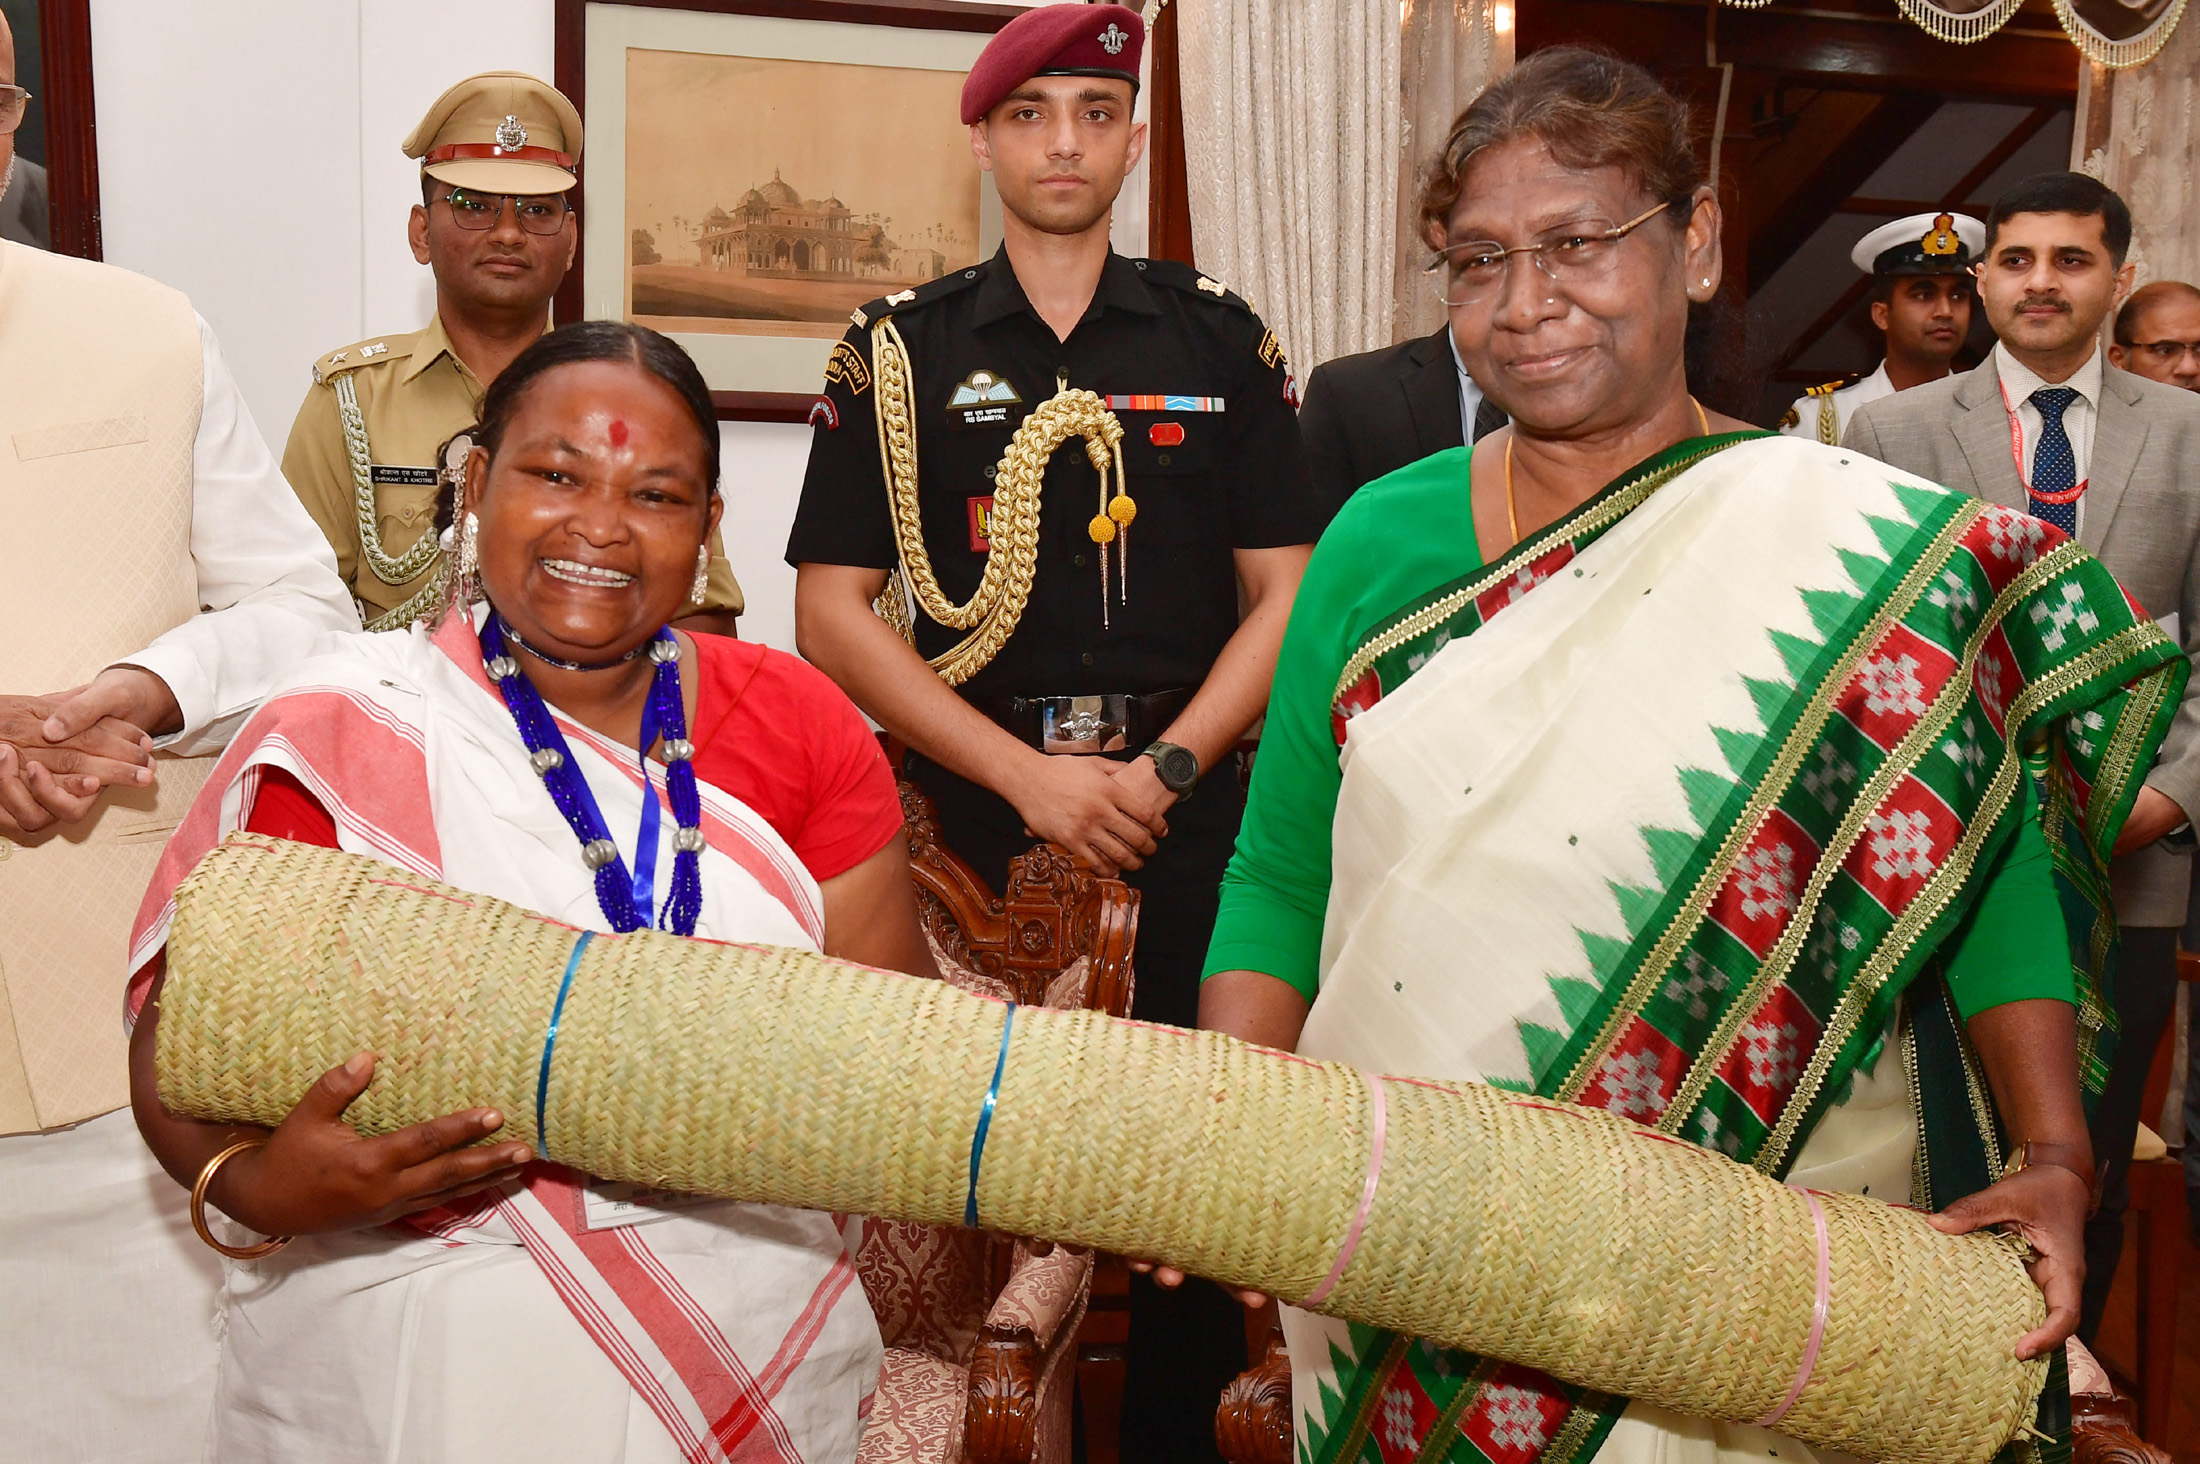 The President of India, Smt. Droupadi Murmu interacting with members of Particularly Vulnerable Tribal Groups (PVTGs) of Jharkhand at Raj Bhavan, in Ranchi on May 24, 2023.